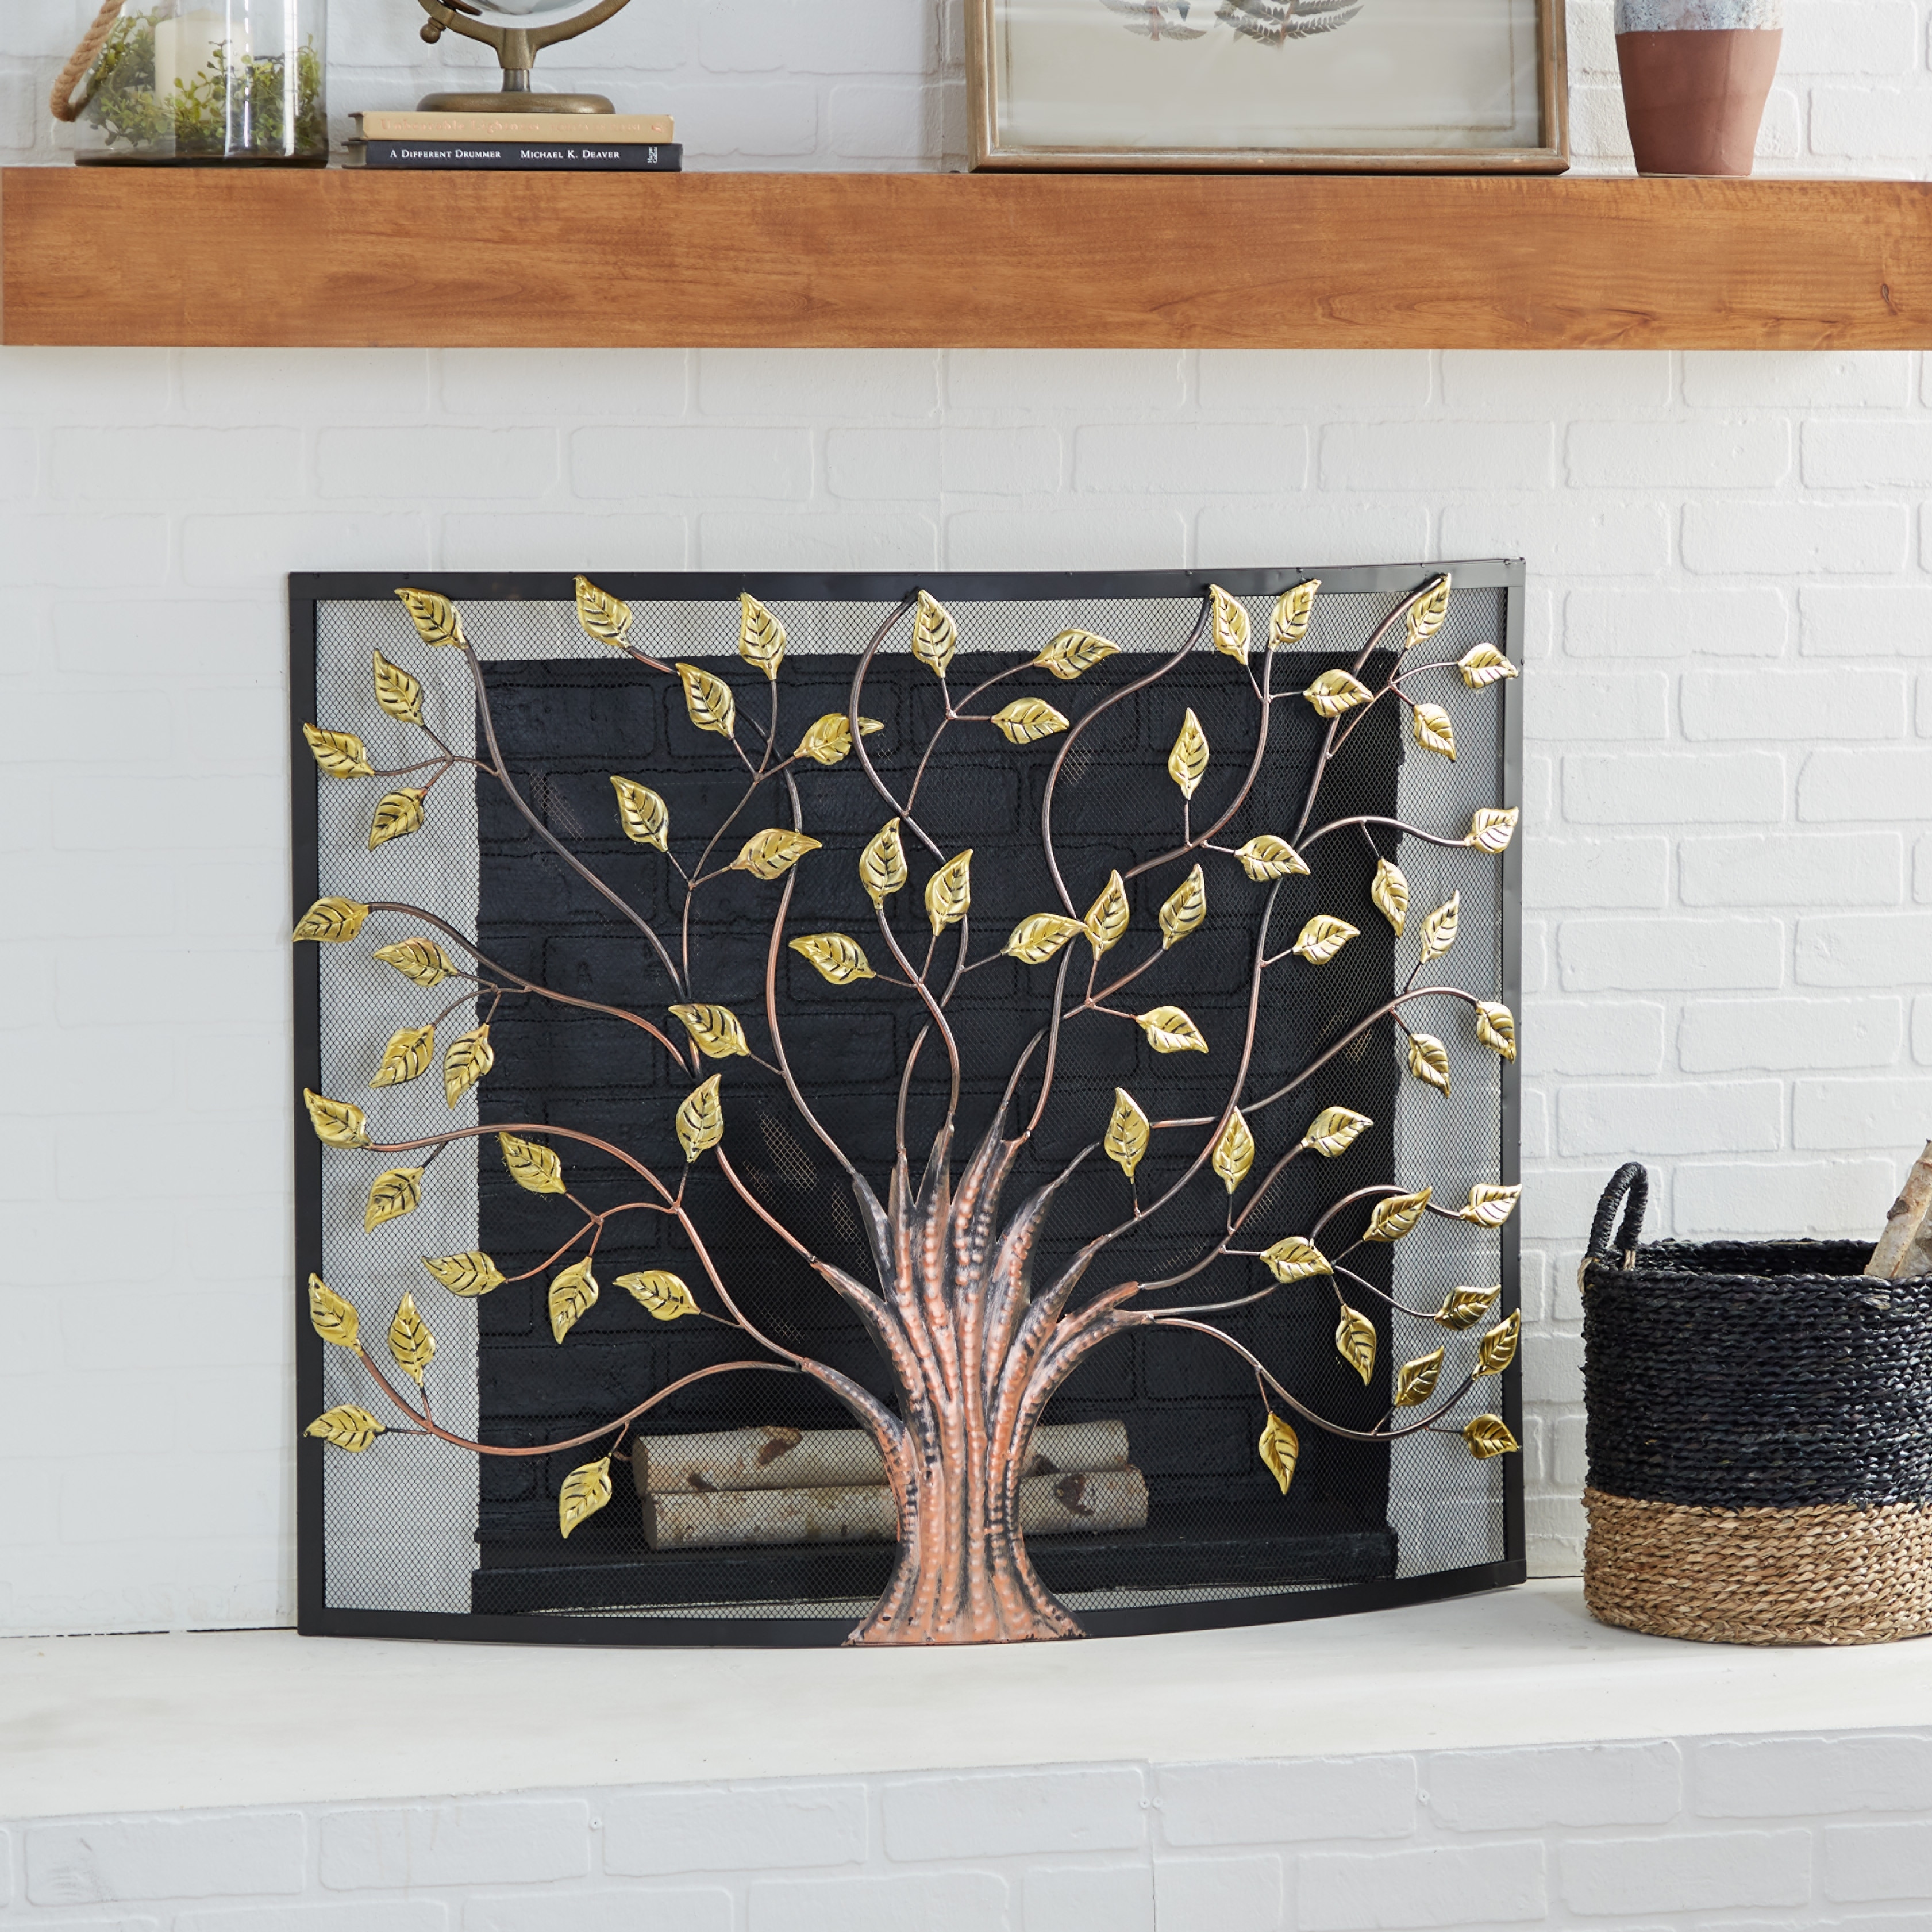 Bronze Metal Sculpted Relief Single Panel Tree Fireplace Screen with Curved  Mesh Netting 33x39x7 On Sale Bed Bath  Beyond 35410467